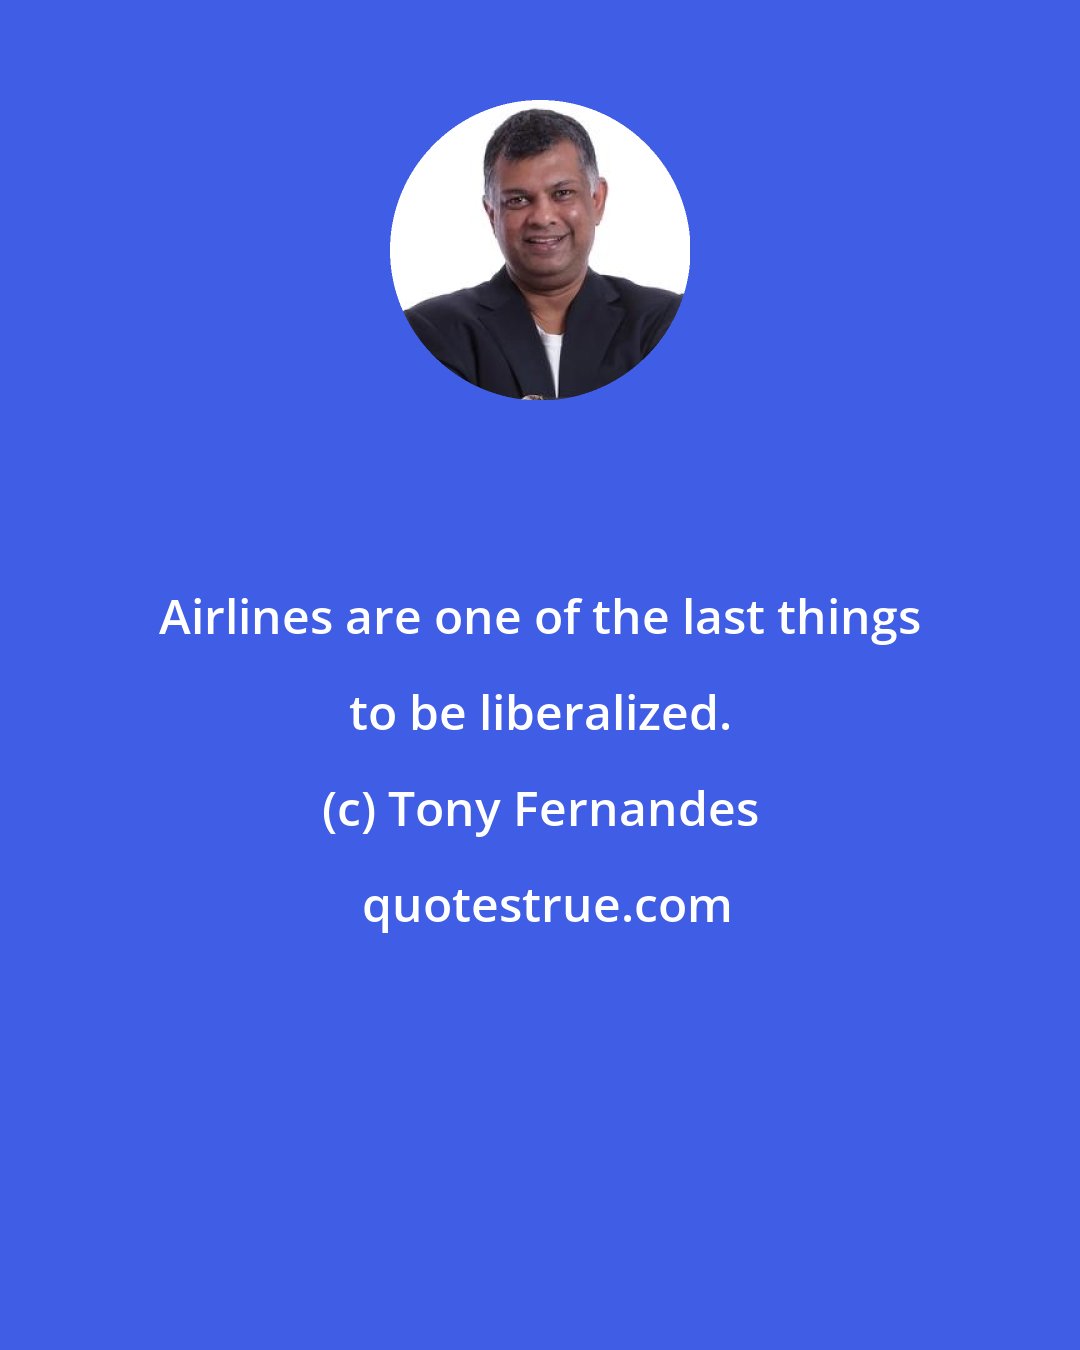 Tony Fernandes: Airlines are one of the last things to be liberalized.